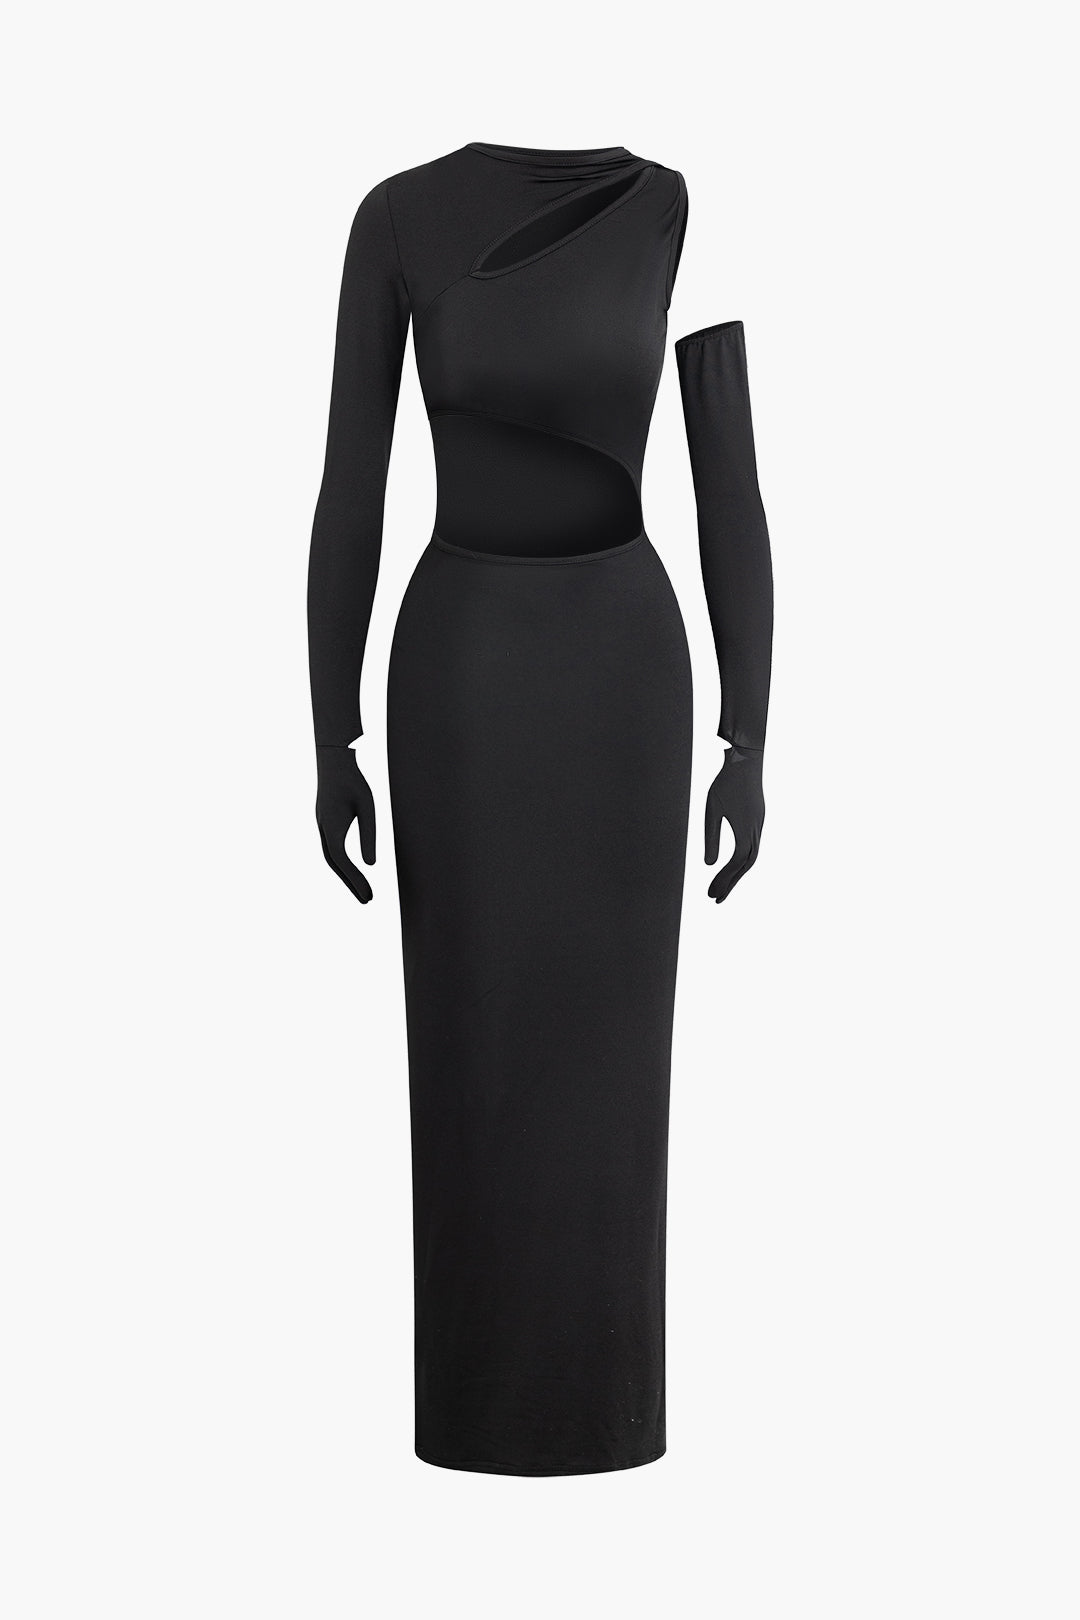 Solid Asymmetrical Cut Out Maxi Dress With Glove